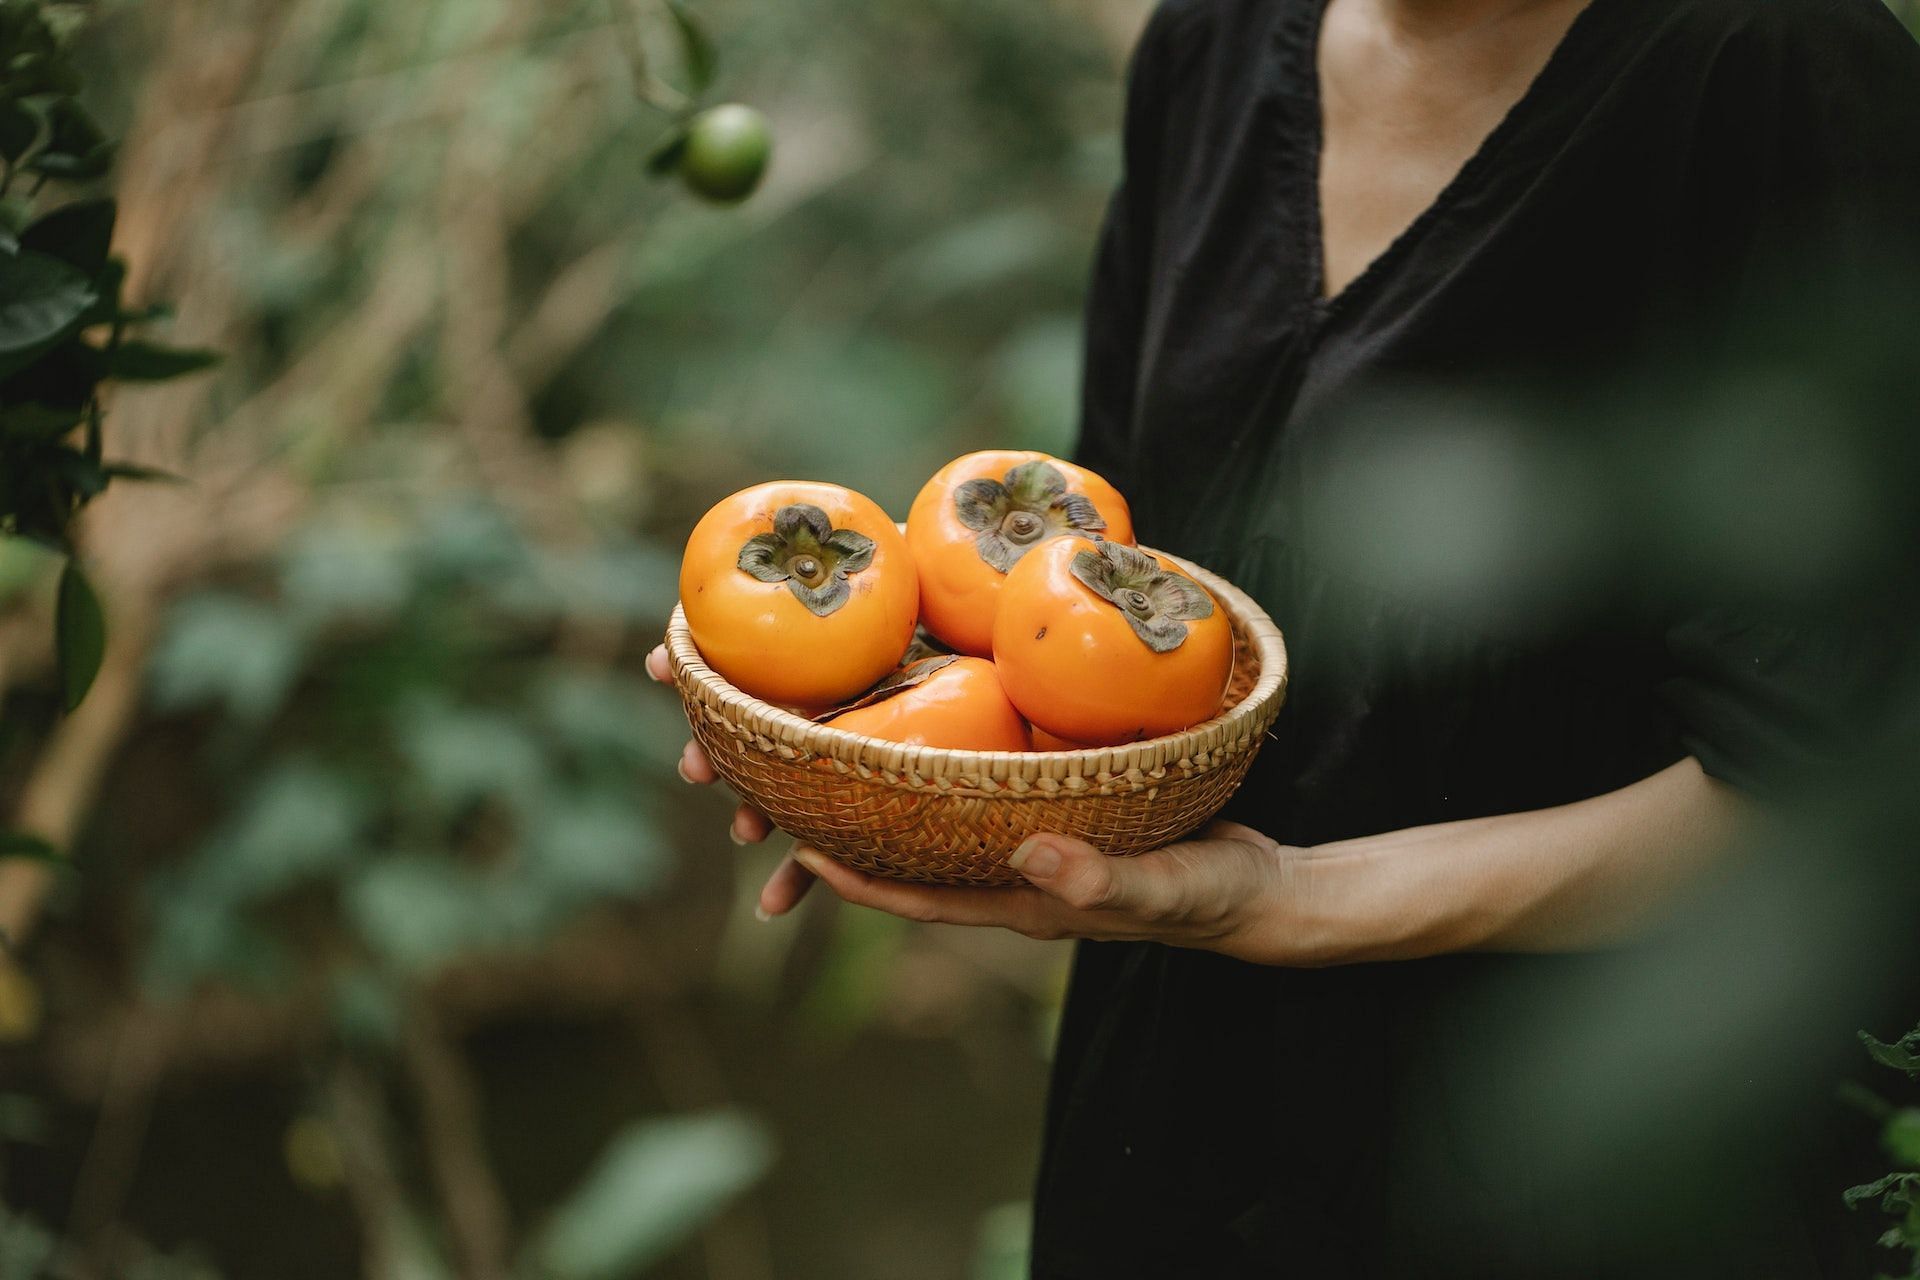 The benefits of persimmon include nourishing the skin. (Photo via Pexels/Any Lane)